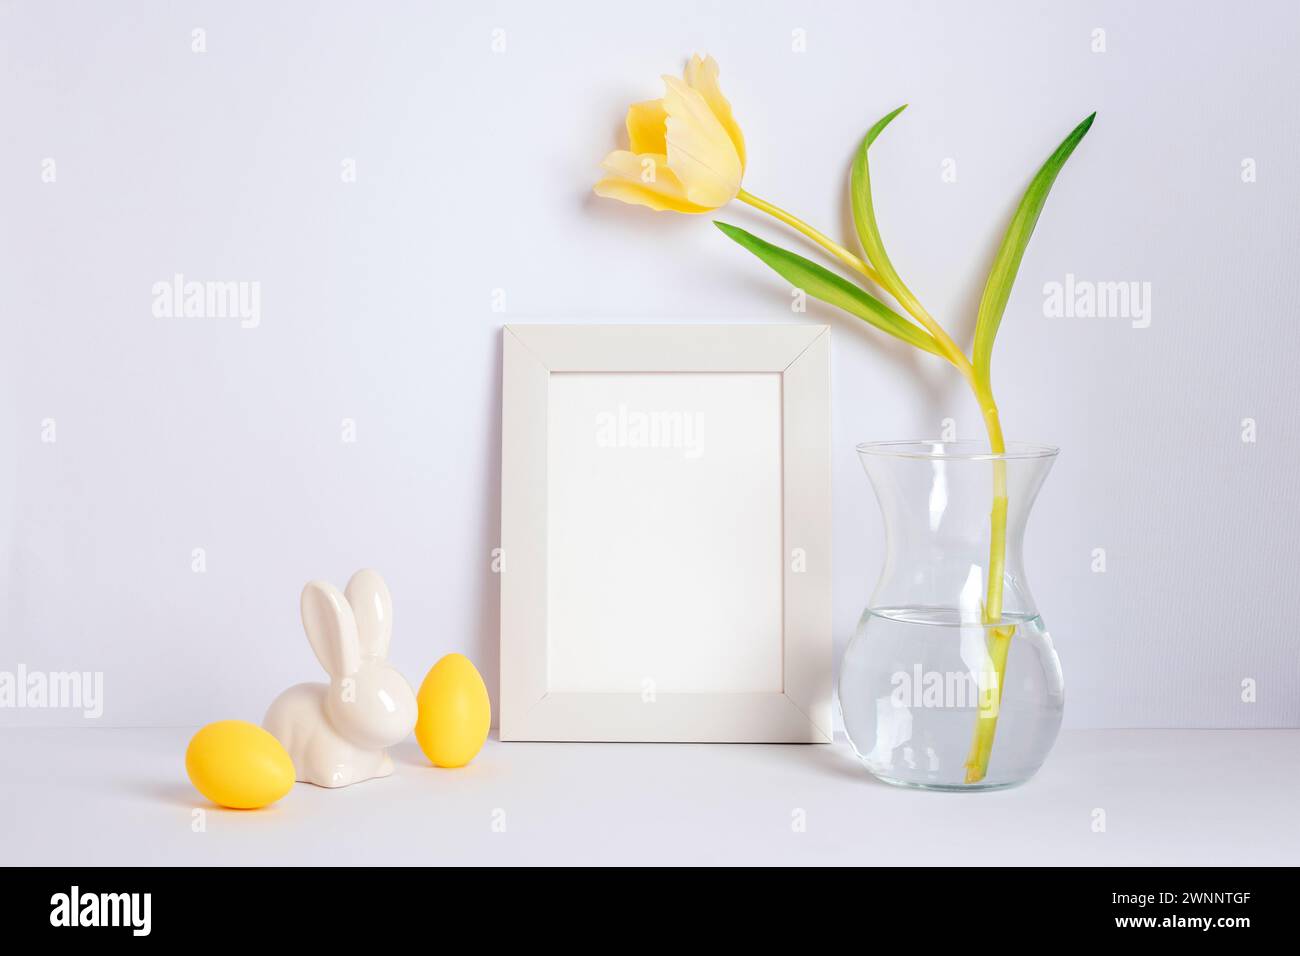 Blank picture frame, yellow tulip in vase and Easter decorations on white background. Easter concept. Stock Photo